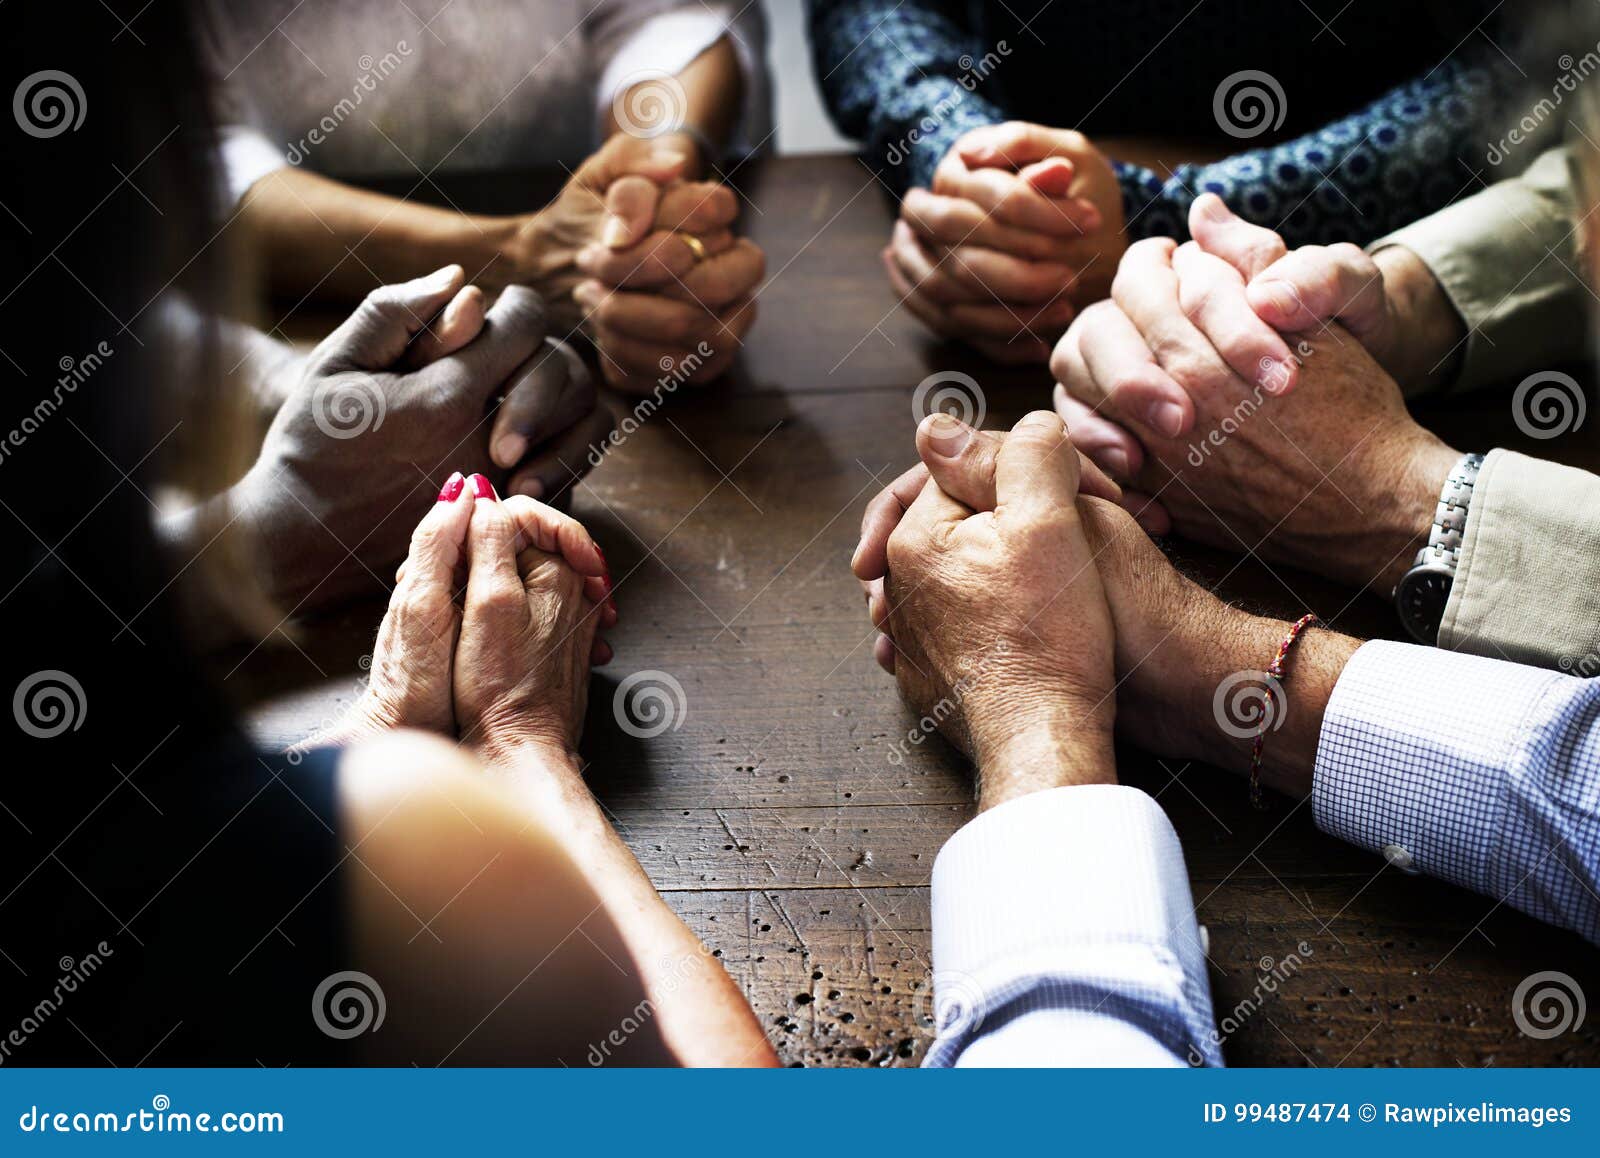 group of christian people are praying together